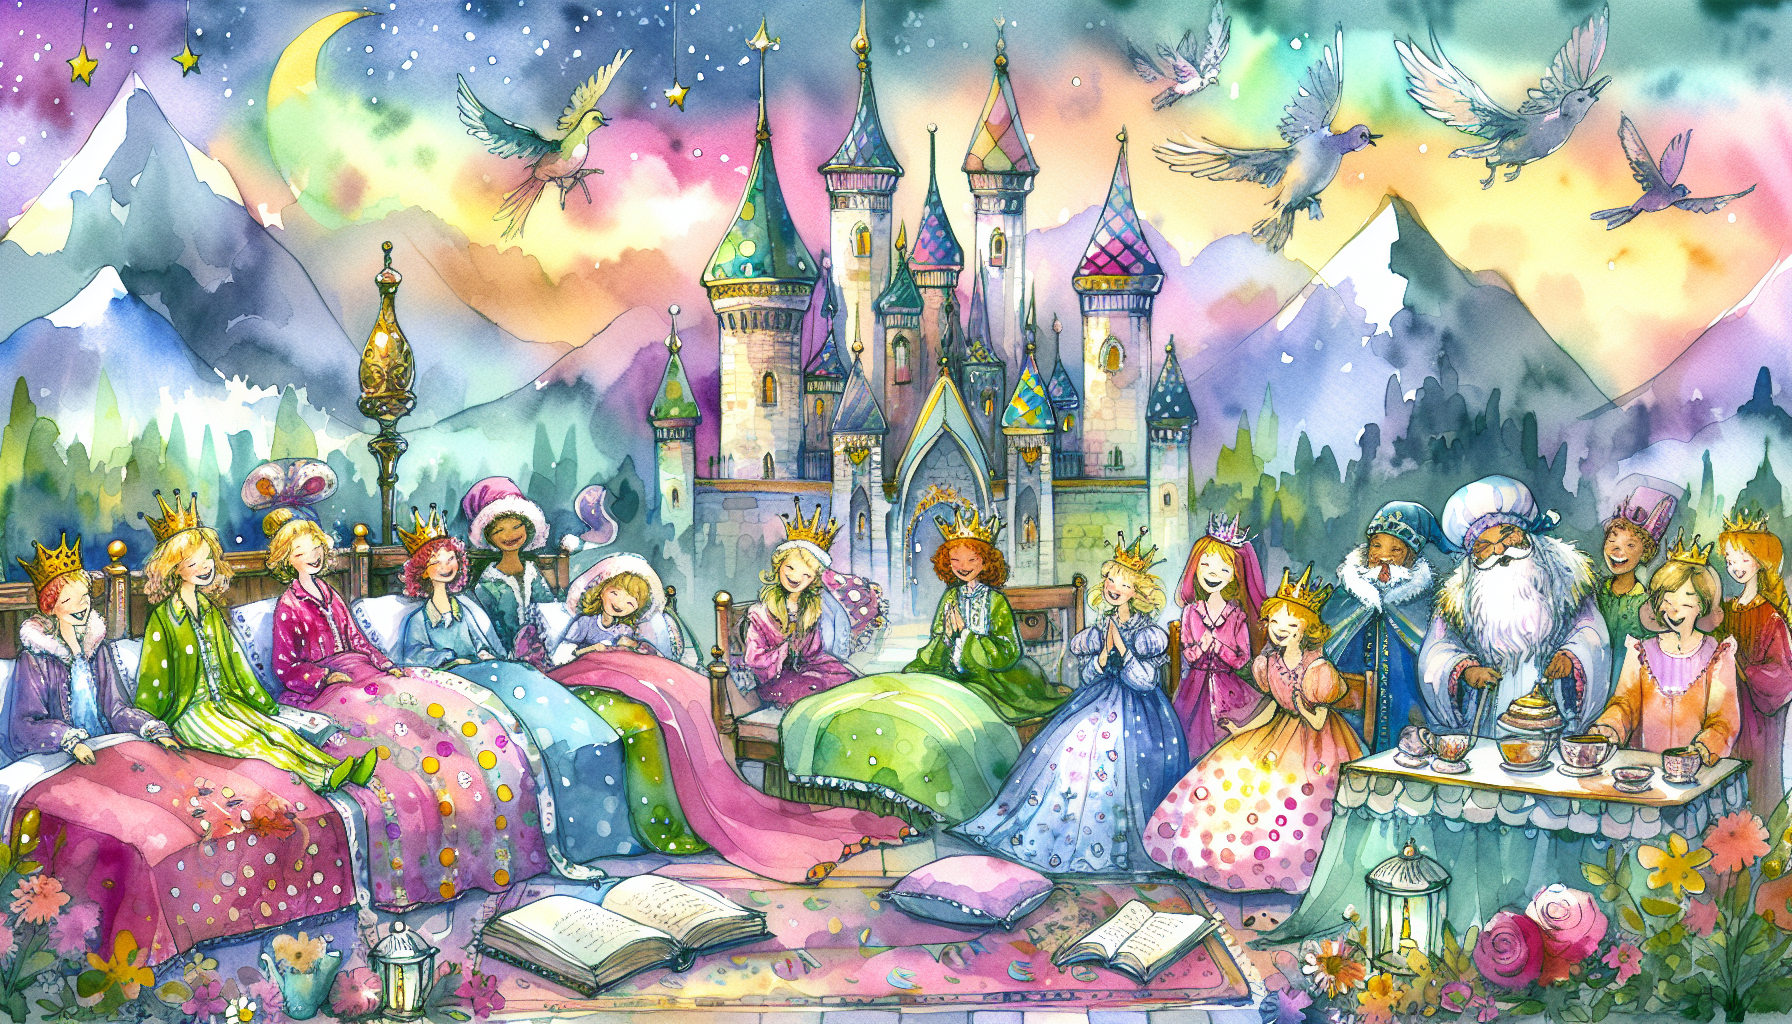 Princess Pajama Parties Whimsical Tales for Sleepy Queens